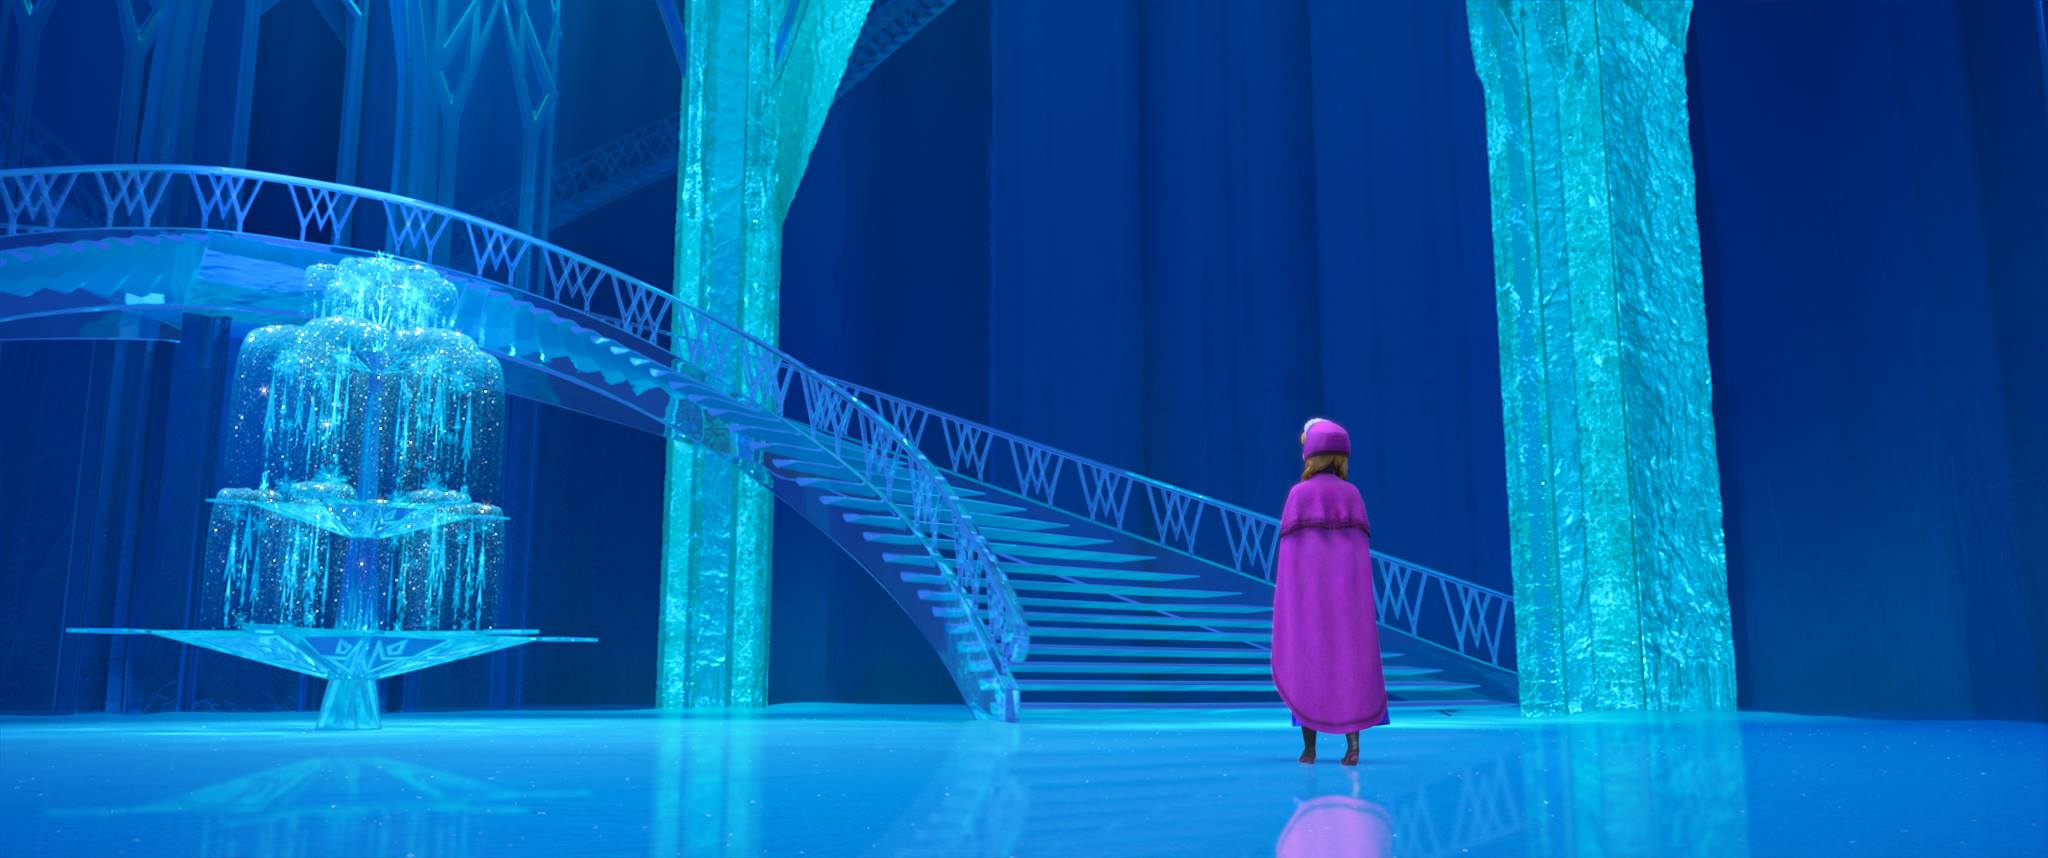 New 'Frozen' Images Show Off Elsa's Ice Palace, Arendelle & More